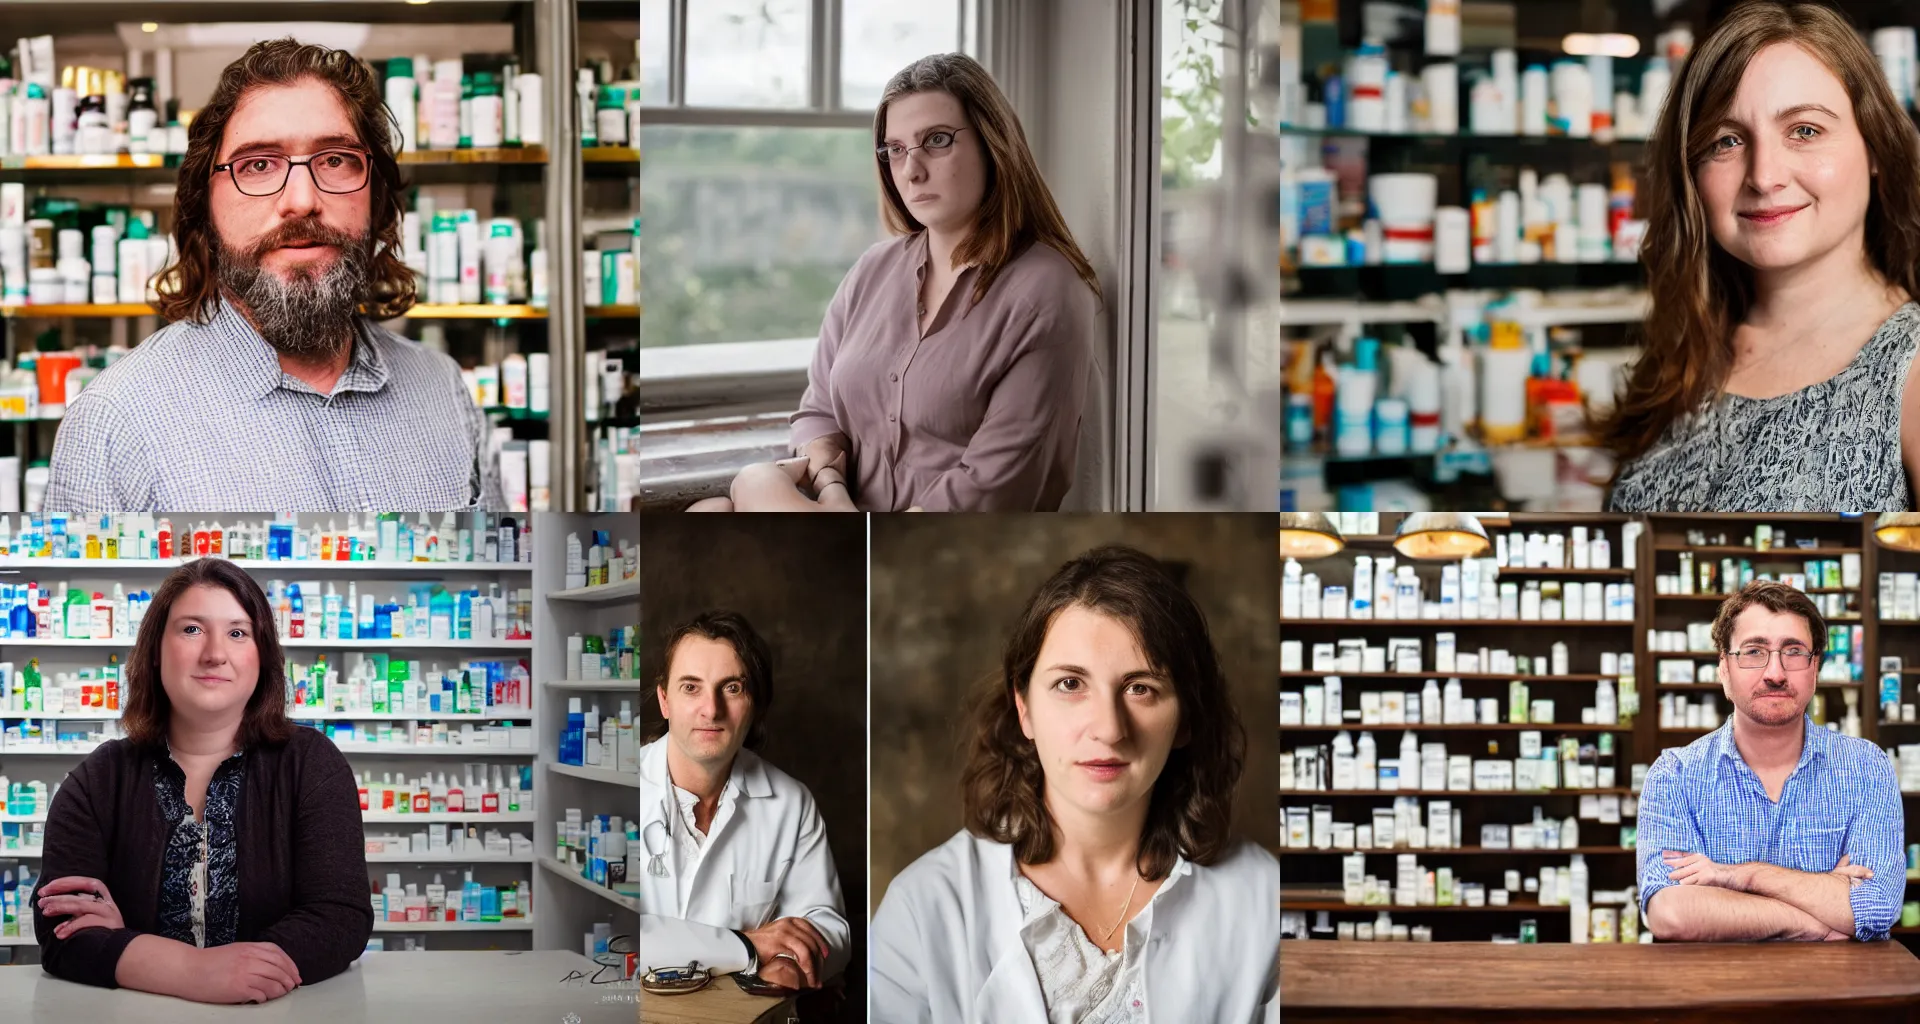 Prompt: closeup headshot photo of the person who is a pharmacist and a folk singer, glass shelf background by Gregory Crewdson and photography by Laura Pannack, visible details, Nikon D850, f/5.6, ISO 100